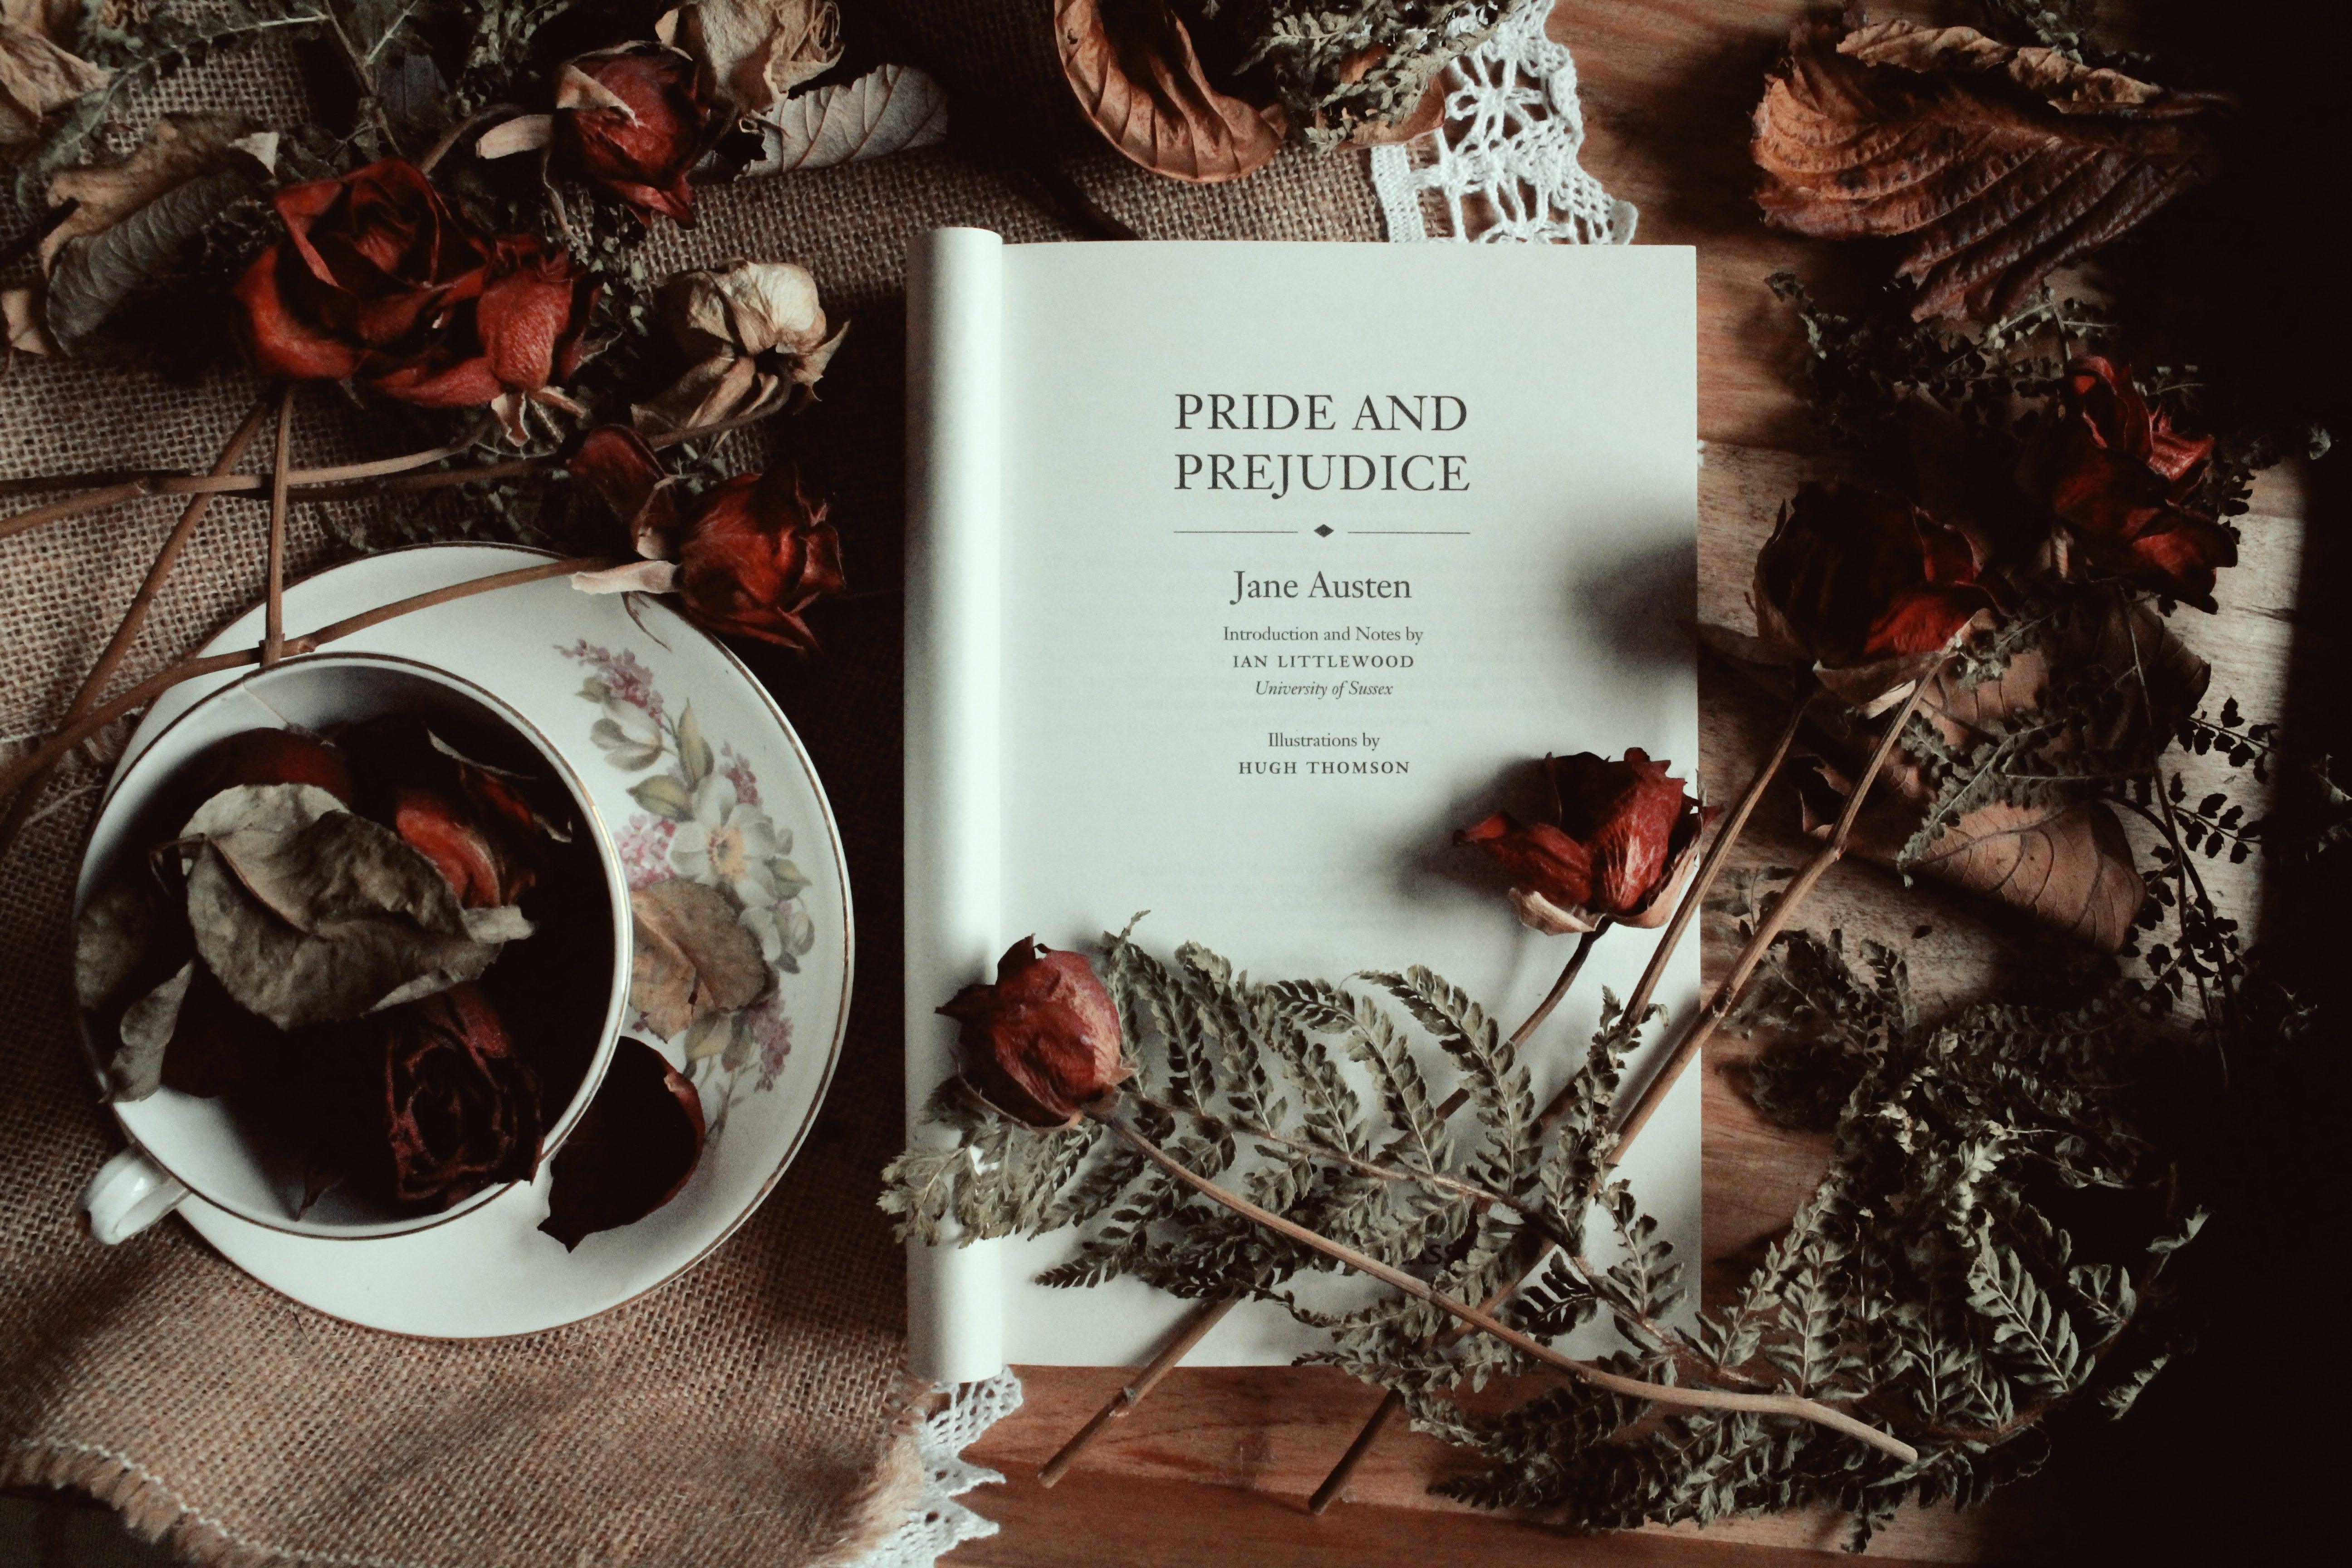 Pride and Prejudice surrounded by dried flowers